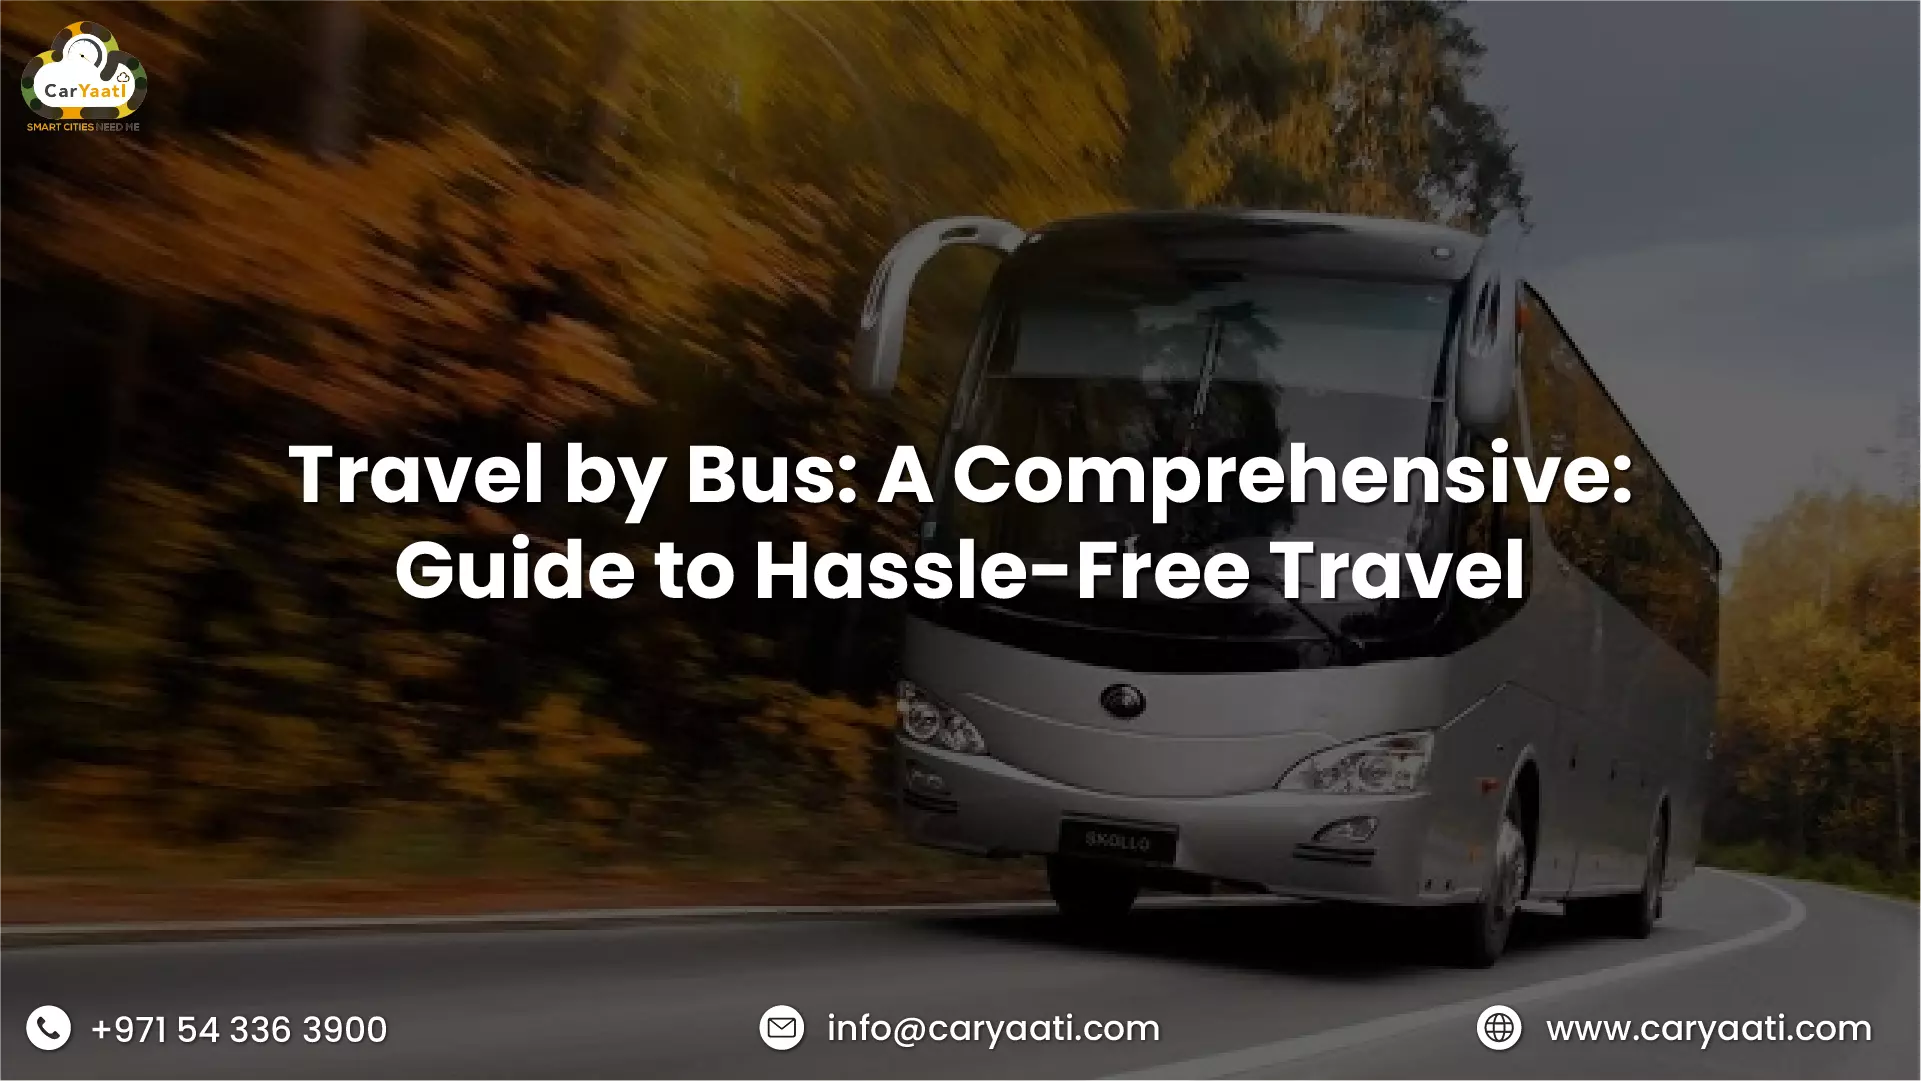 Travel by Rental Bus in UAE: A Comprehensive Guide to Hassle-Free Travel